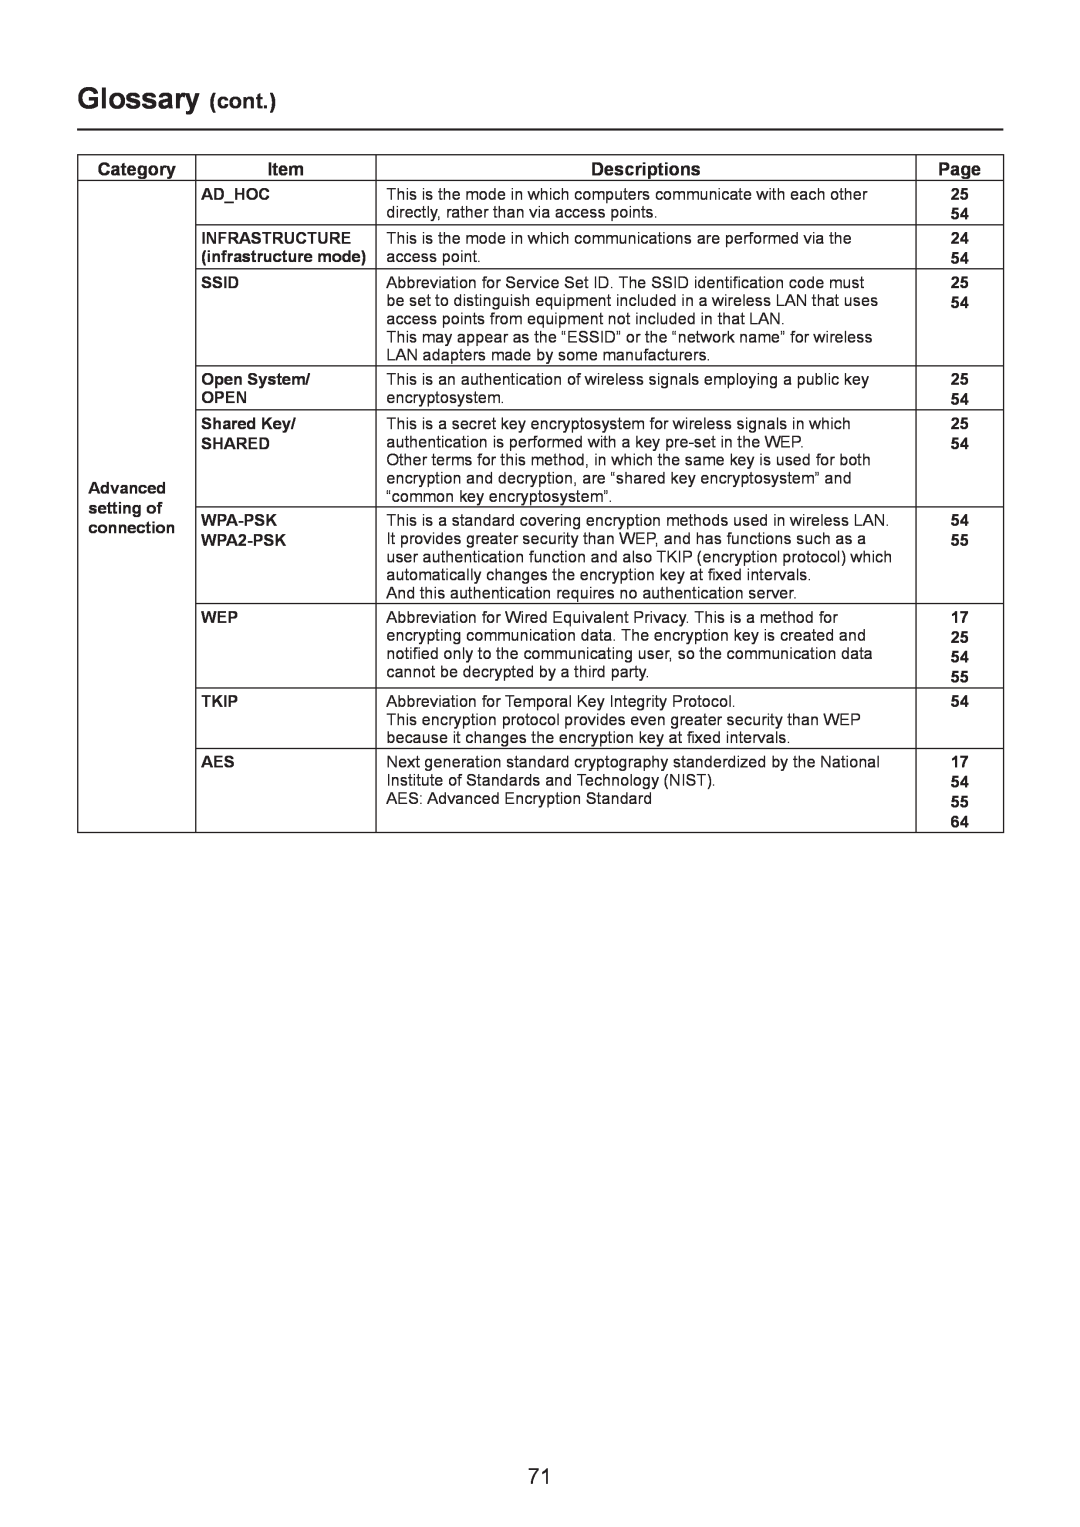 Panasonic TQBH0205-4 Glossary cont, Adhoc, Infrastructure, infrastructure mode, Ssid, Open System, Shared Key, Advanced 